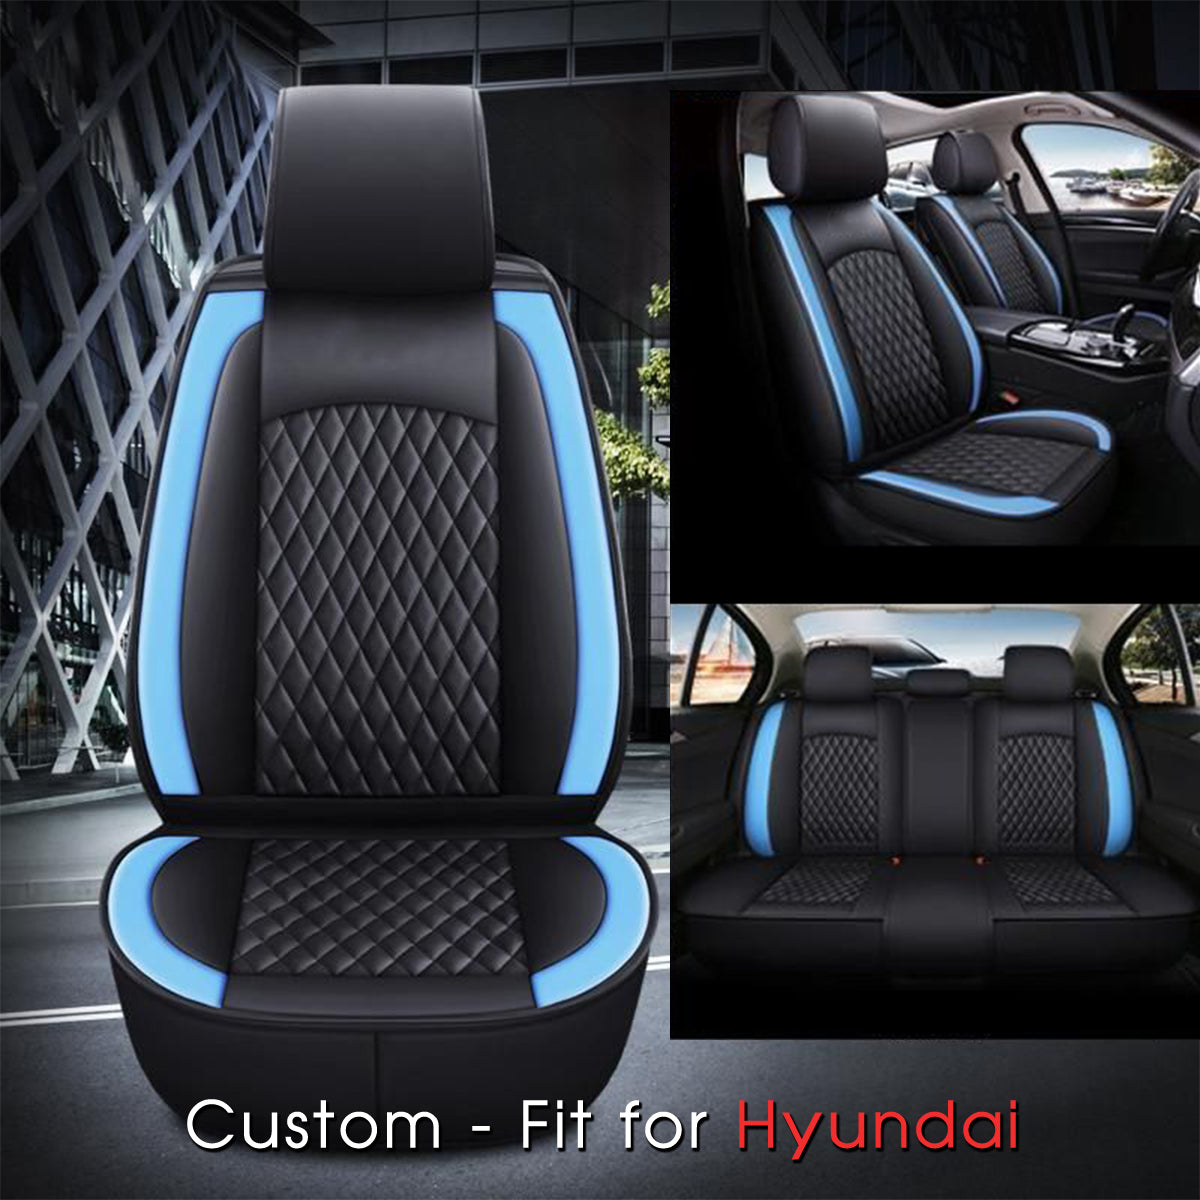 2 Car Seat Covers Full Set, Custom-Fit For Car, Waterproof Leather Front Rear Seat Automotive Protection Cushions, Car Accessories DLHY211